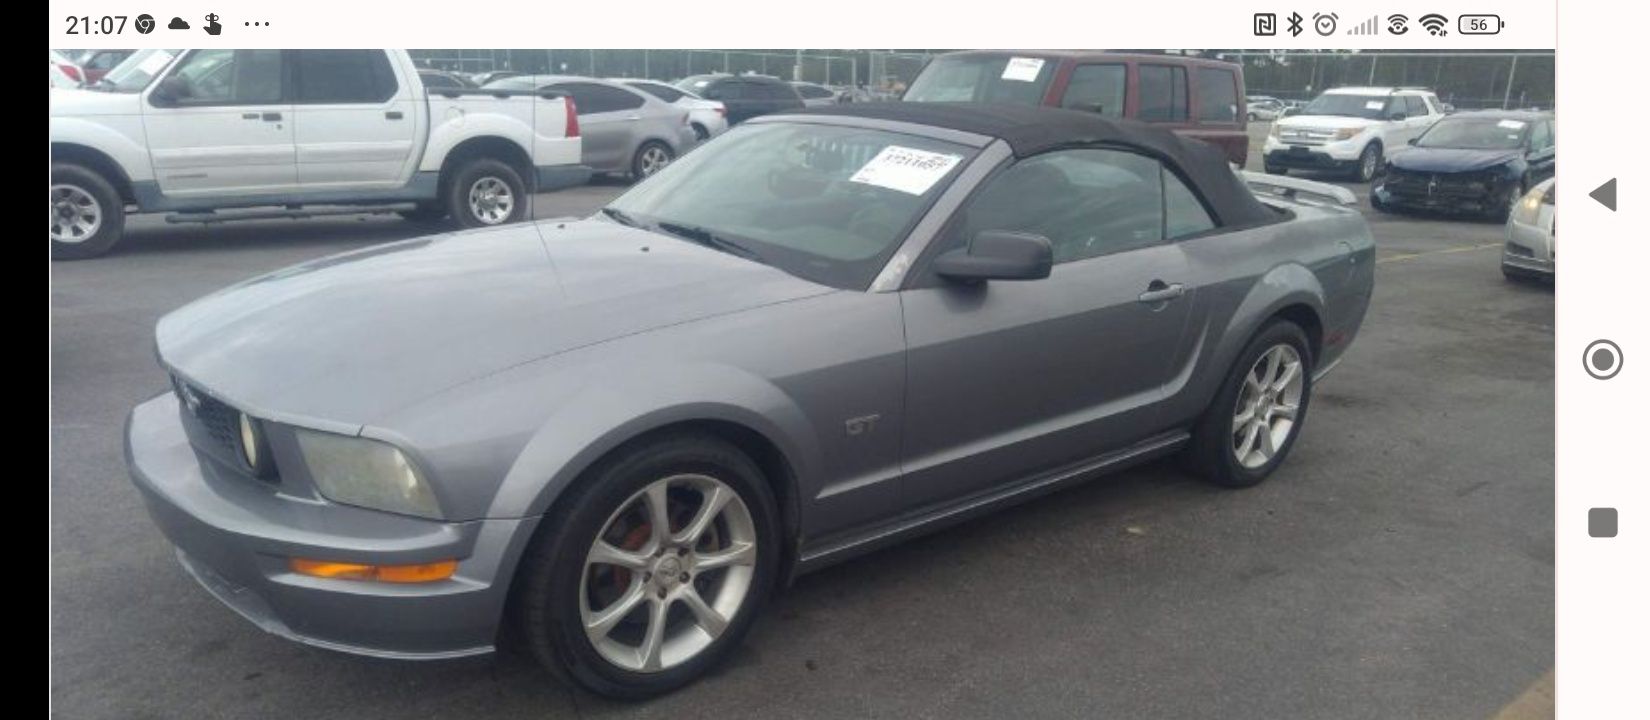 Ford Mustang GT Cabrio v8 4.6 już w PL